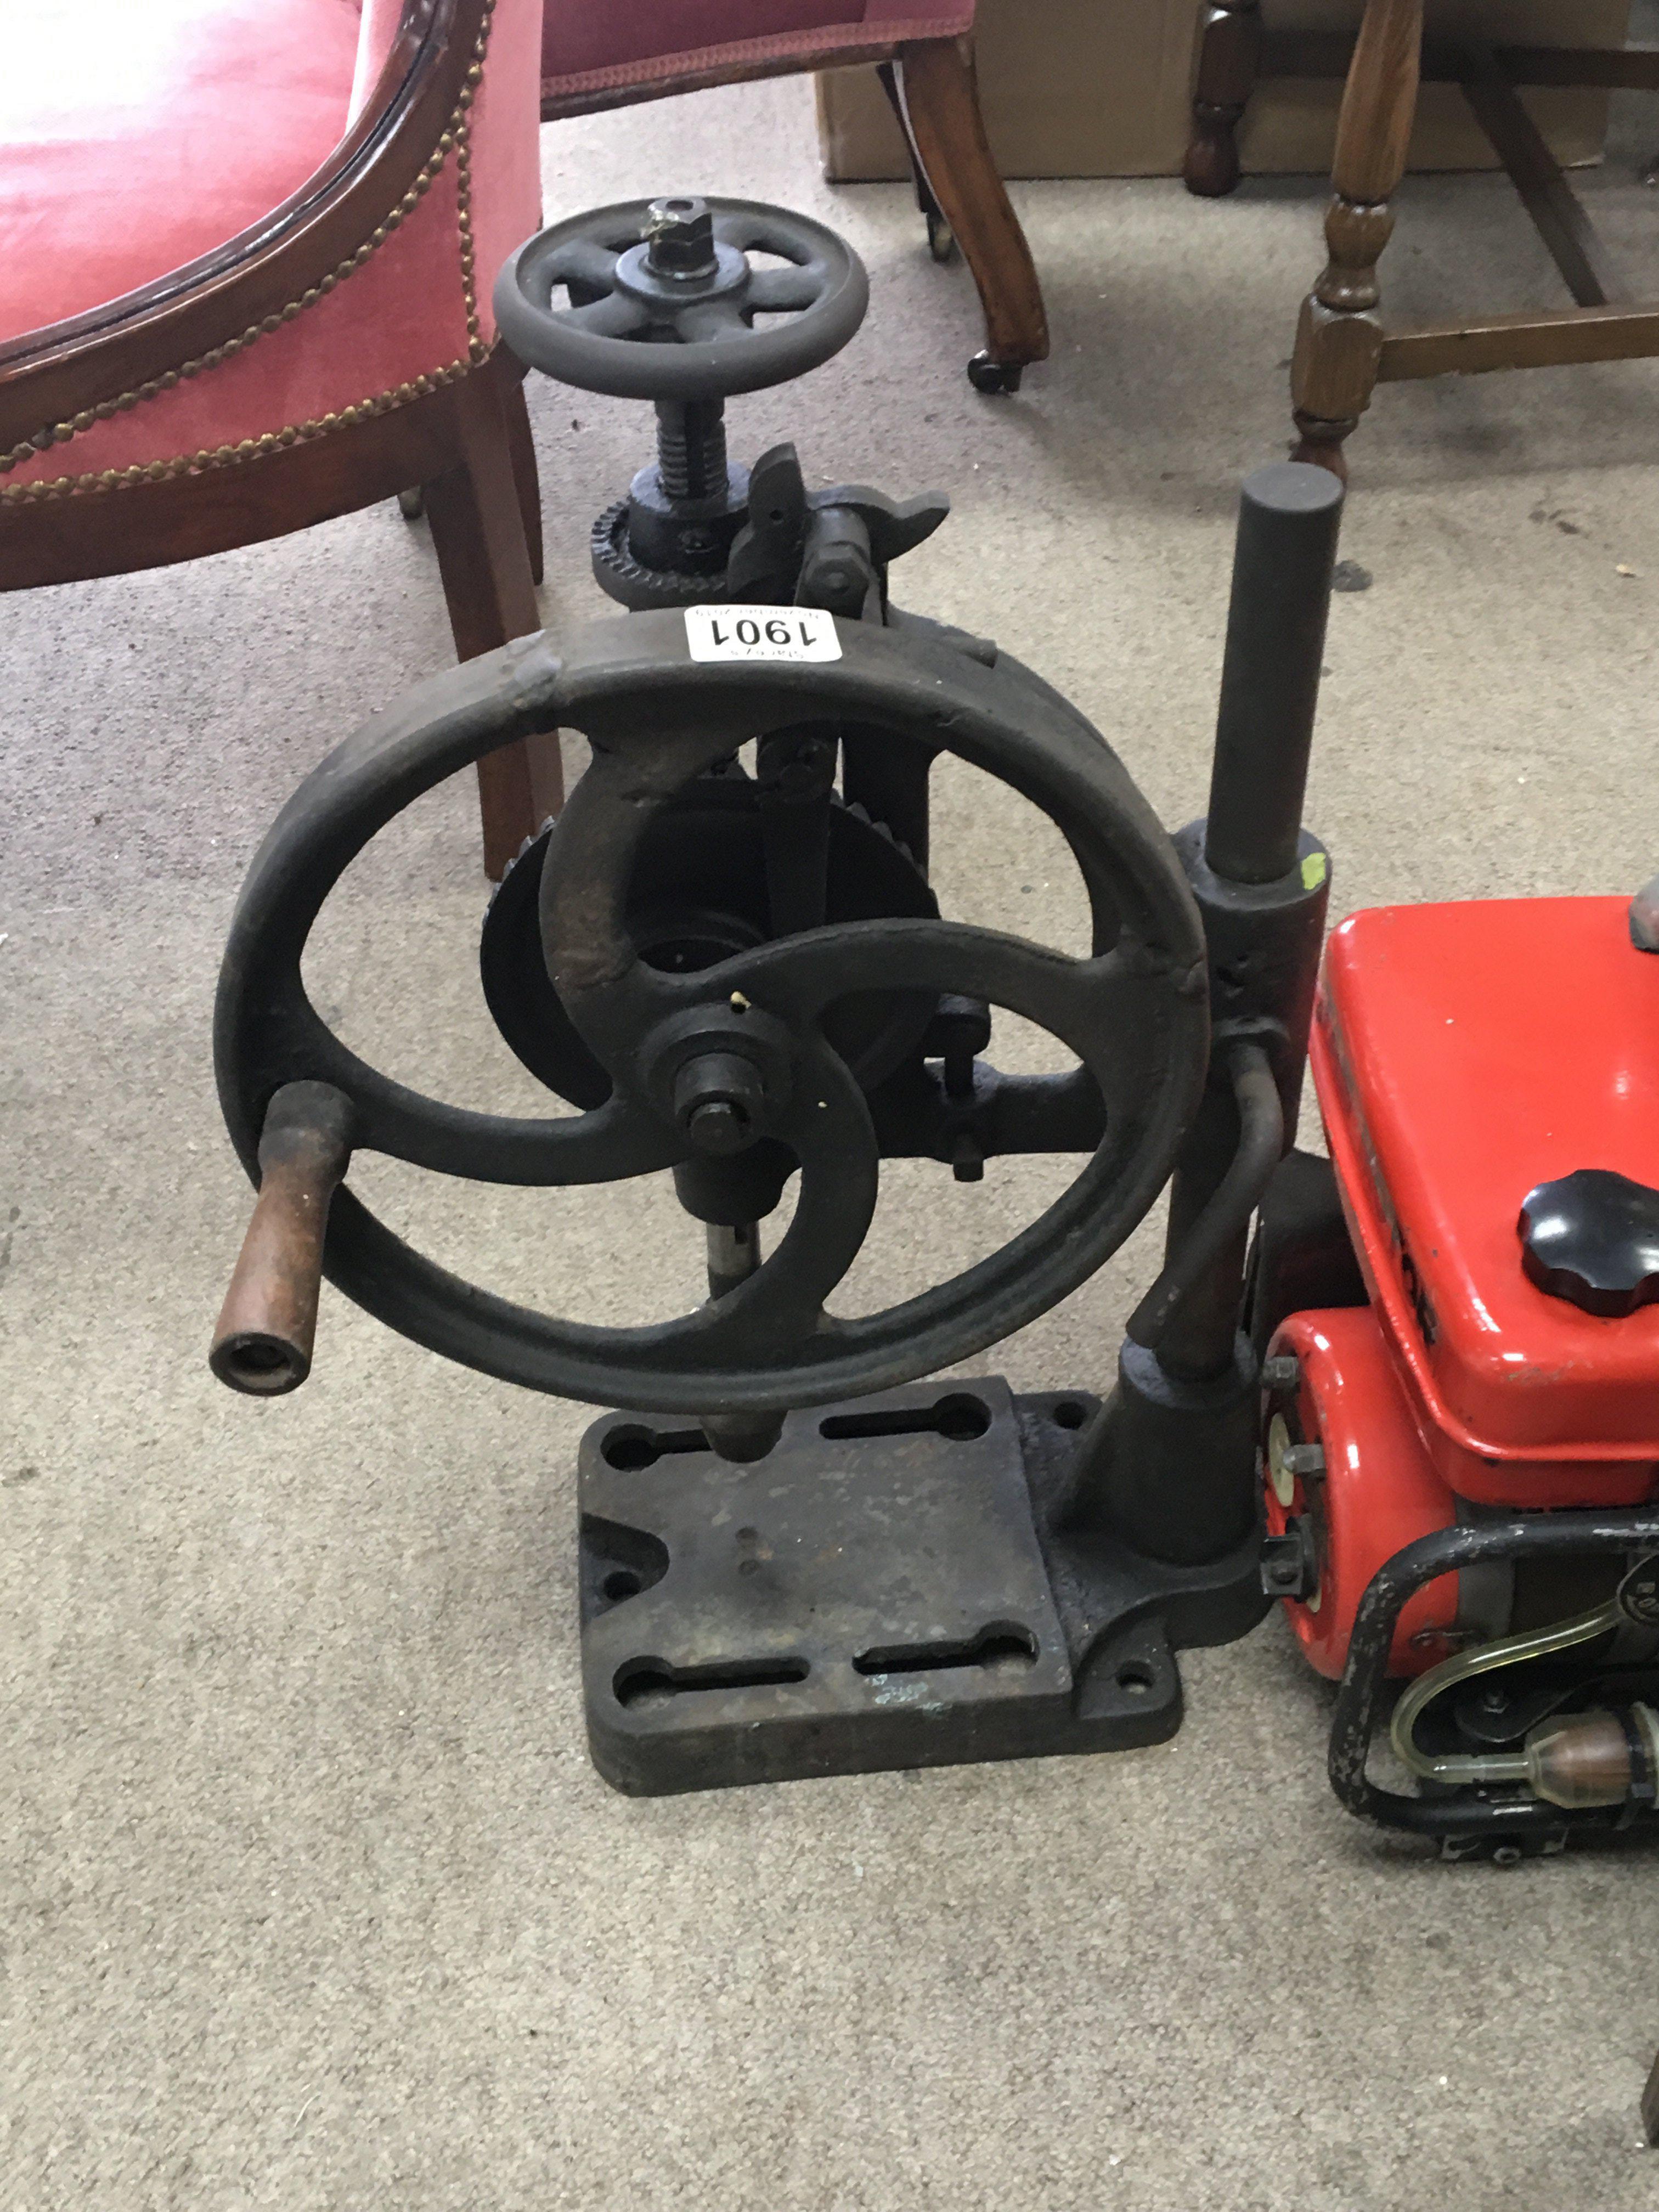 An old manual pillar drill fuel cans and vintage small portable TV (a lot)